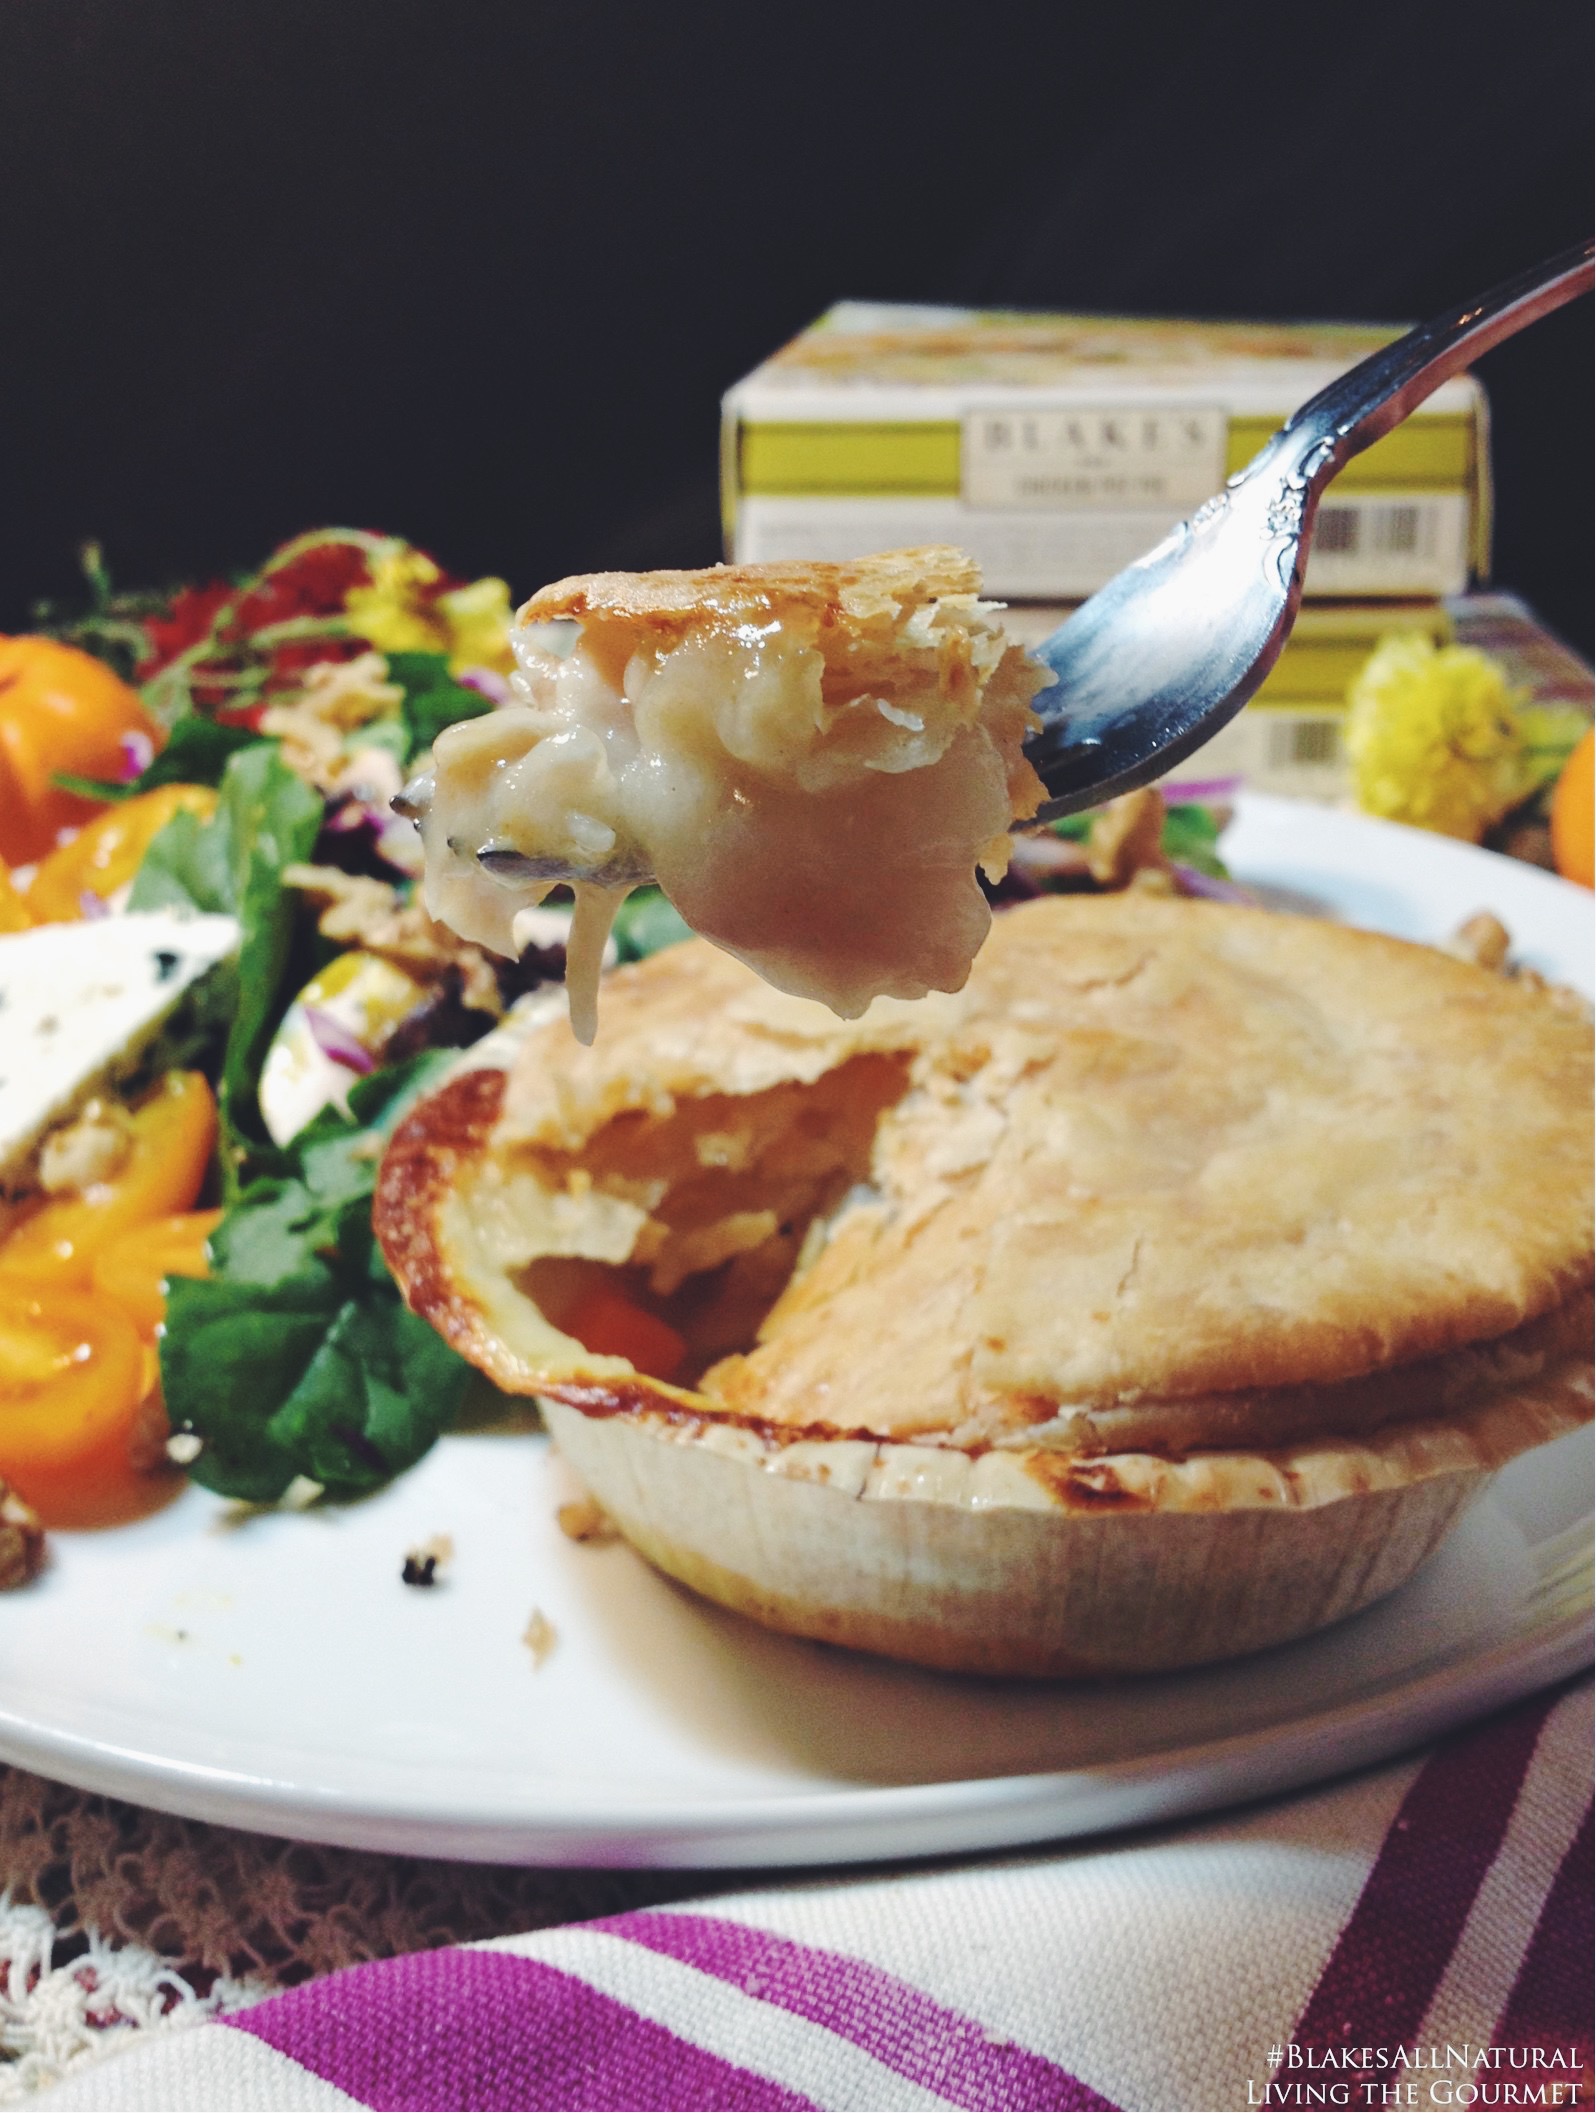 Living the Gourmet: Chicken Pot Pie and Honey Mustard Spinach Salad | #BlakesAllNatural AD